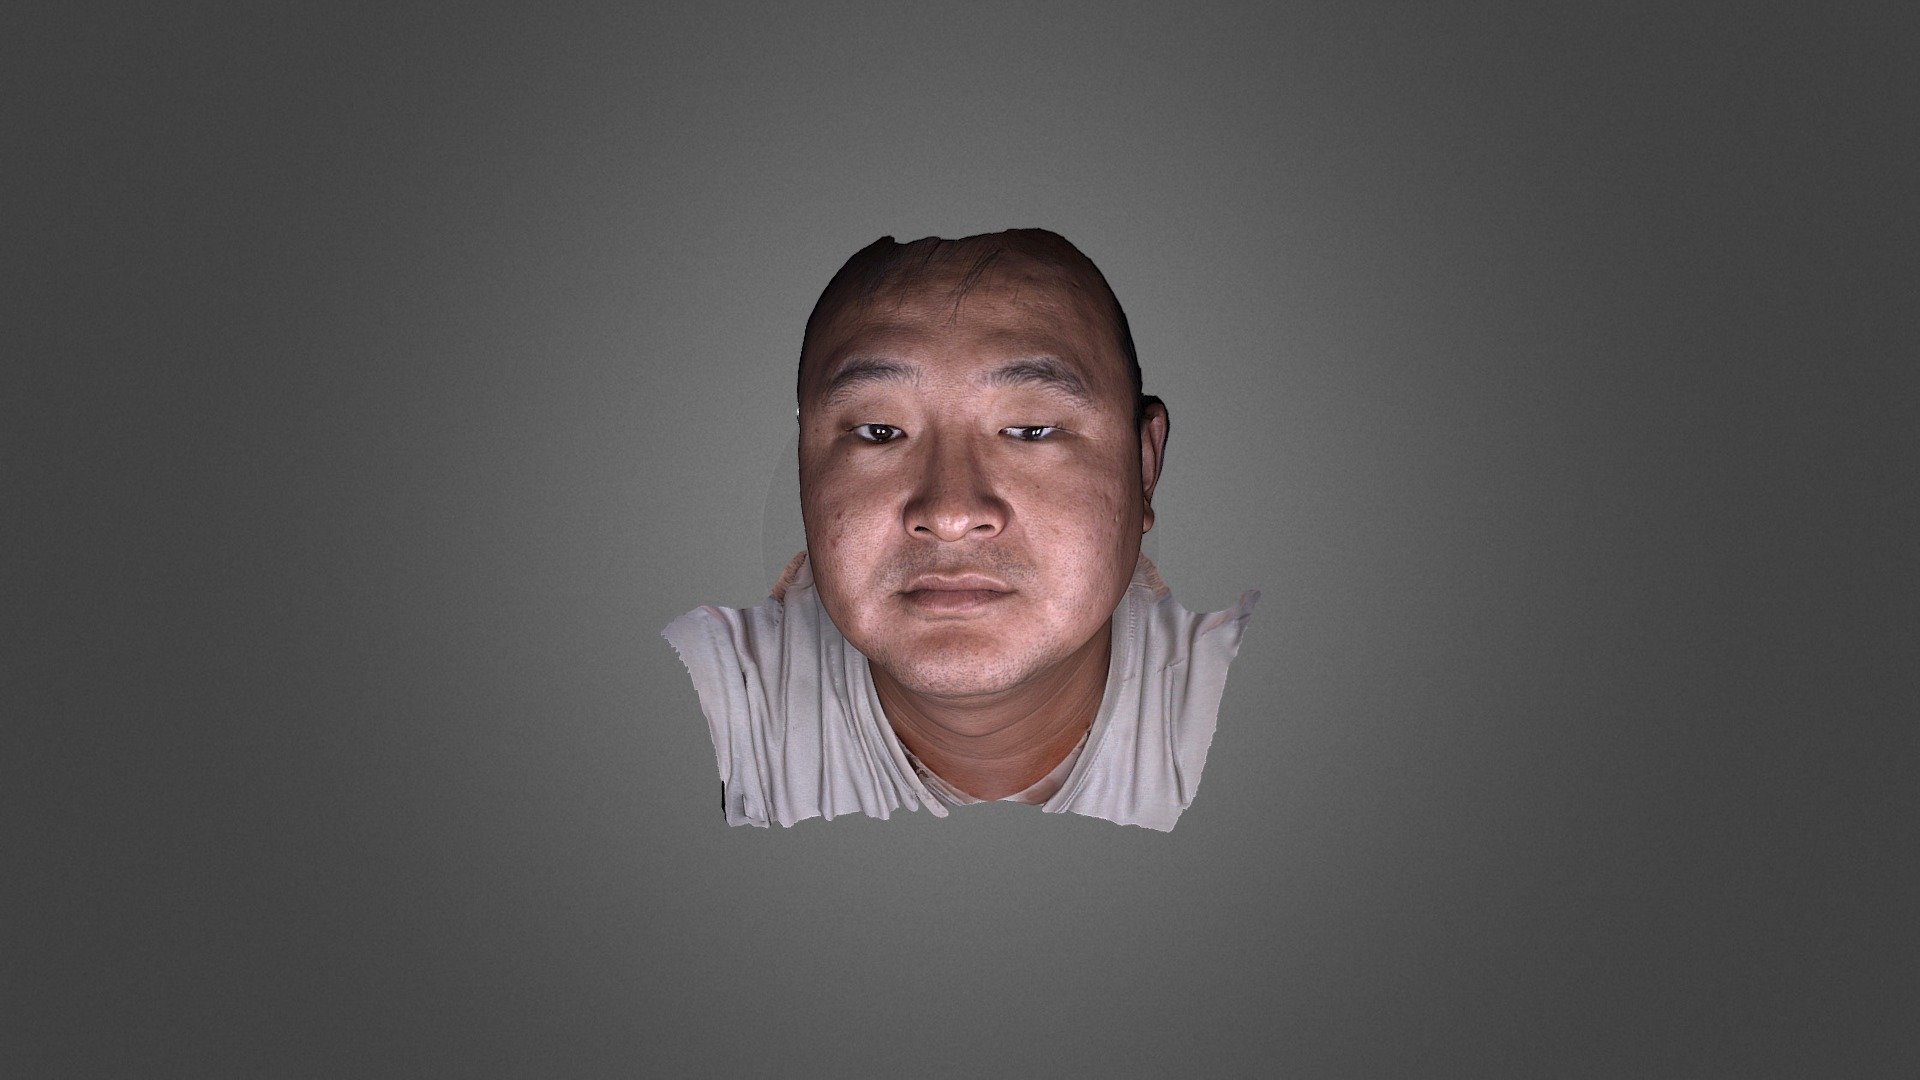 This face model is scanned with our Fasense product. Facense is a lightweight and portable depth camera used for capturing accurate 3D face model. Multiple cameras can be flexibly combined to collect and capture human face data from different angles in seconds. You may add more cameras to capture a 360° face model. The infrared light won’t cause any damage to human eye. With the proprietary algorithm and MEMS chip, it can get stable and reliable real-time depth information of the face, with the maximum model accuracy up to 0.1mm.For more information, please go to:https://www.revopoint3d.com/3d-face-scanner-facense-f3/ - 3D Face scanner Facense Model 5: Man - 3D model by Revopoint3d 3d model